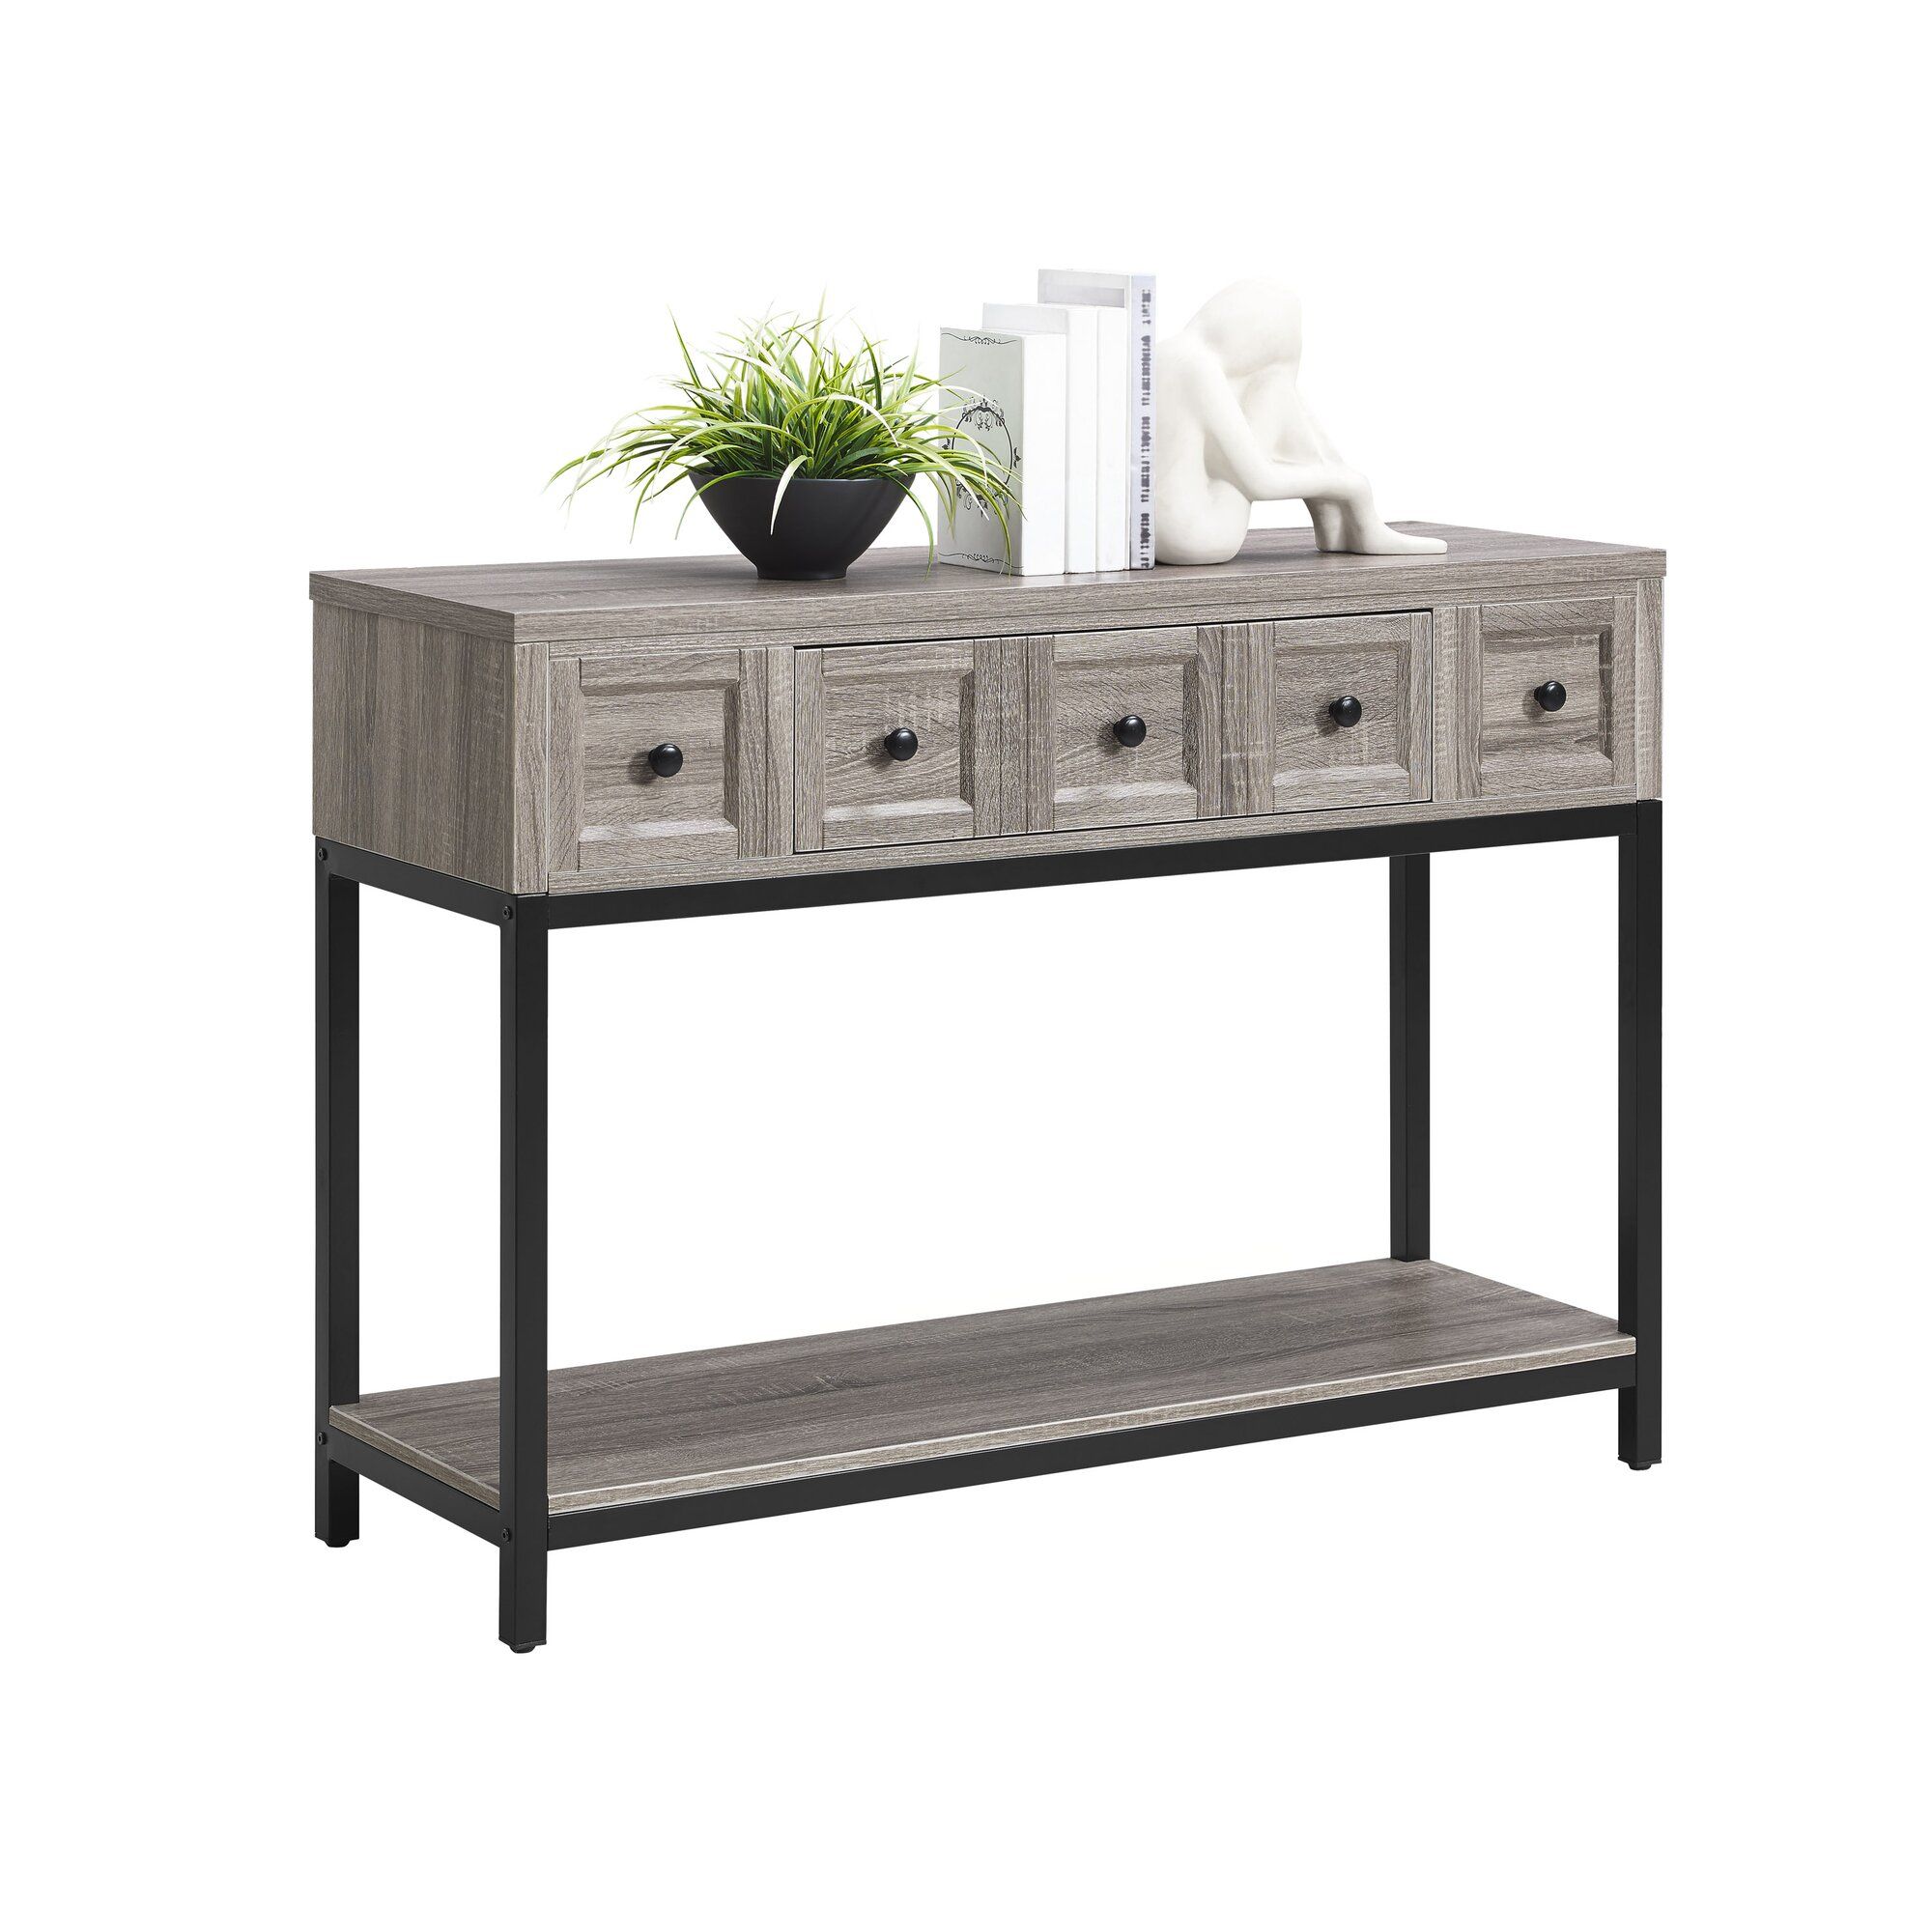 Laurel Foundry Modern Farmhouse Omar Console Table & Reviews | Wayfair Throughout Modern Farmhouse Console Tables (View 13 of 20)